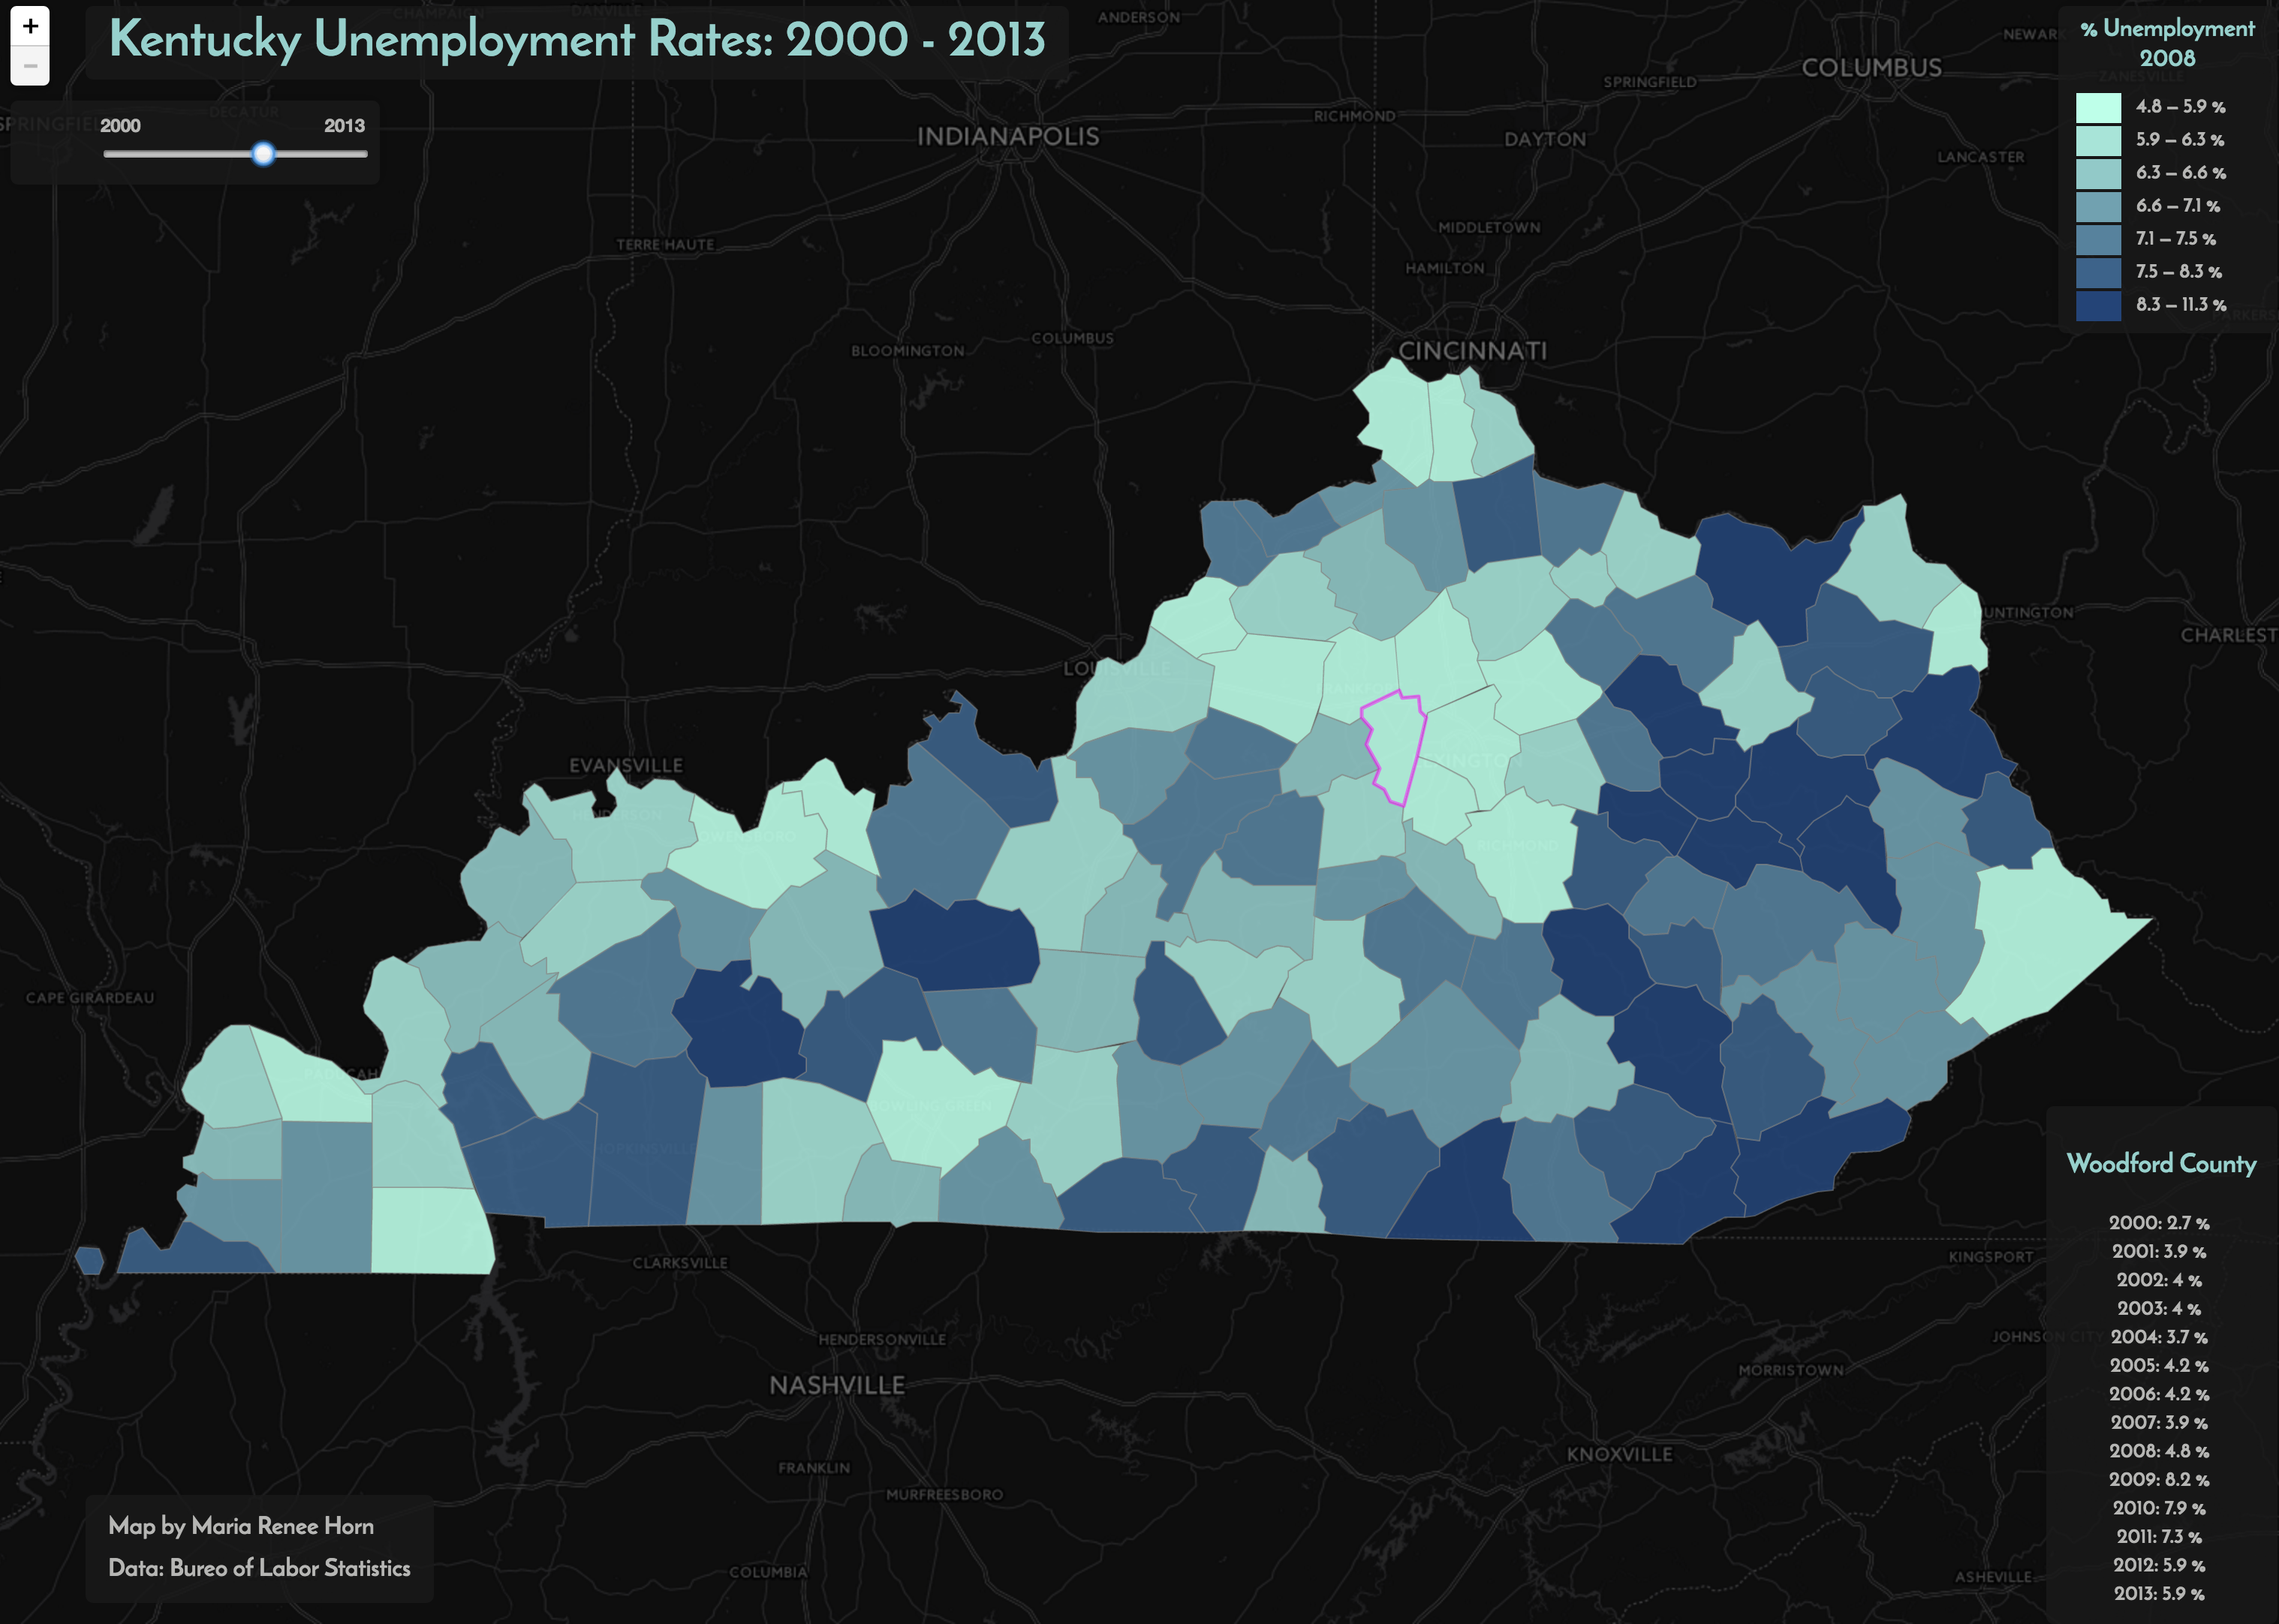 map of unemplyoment rates in Kentucky